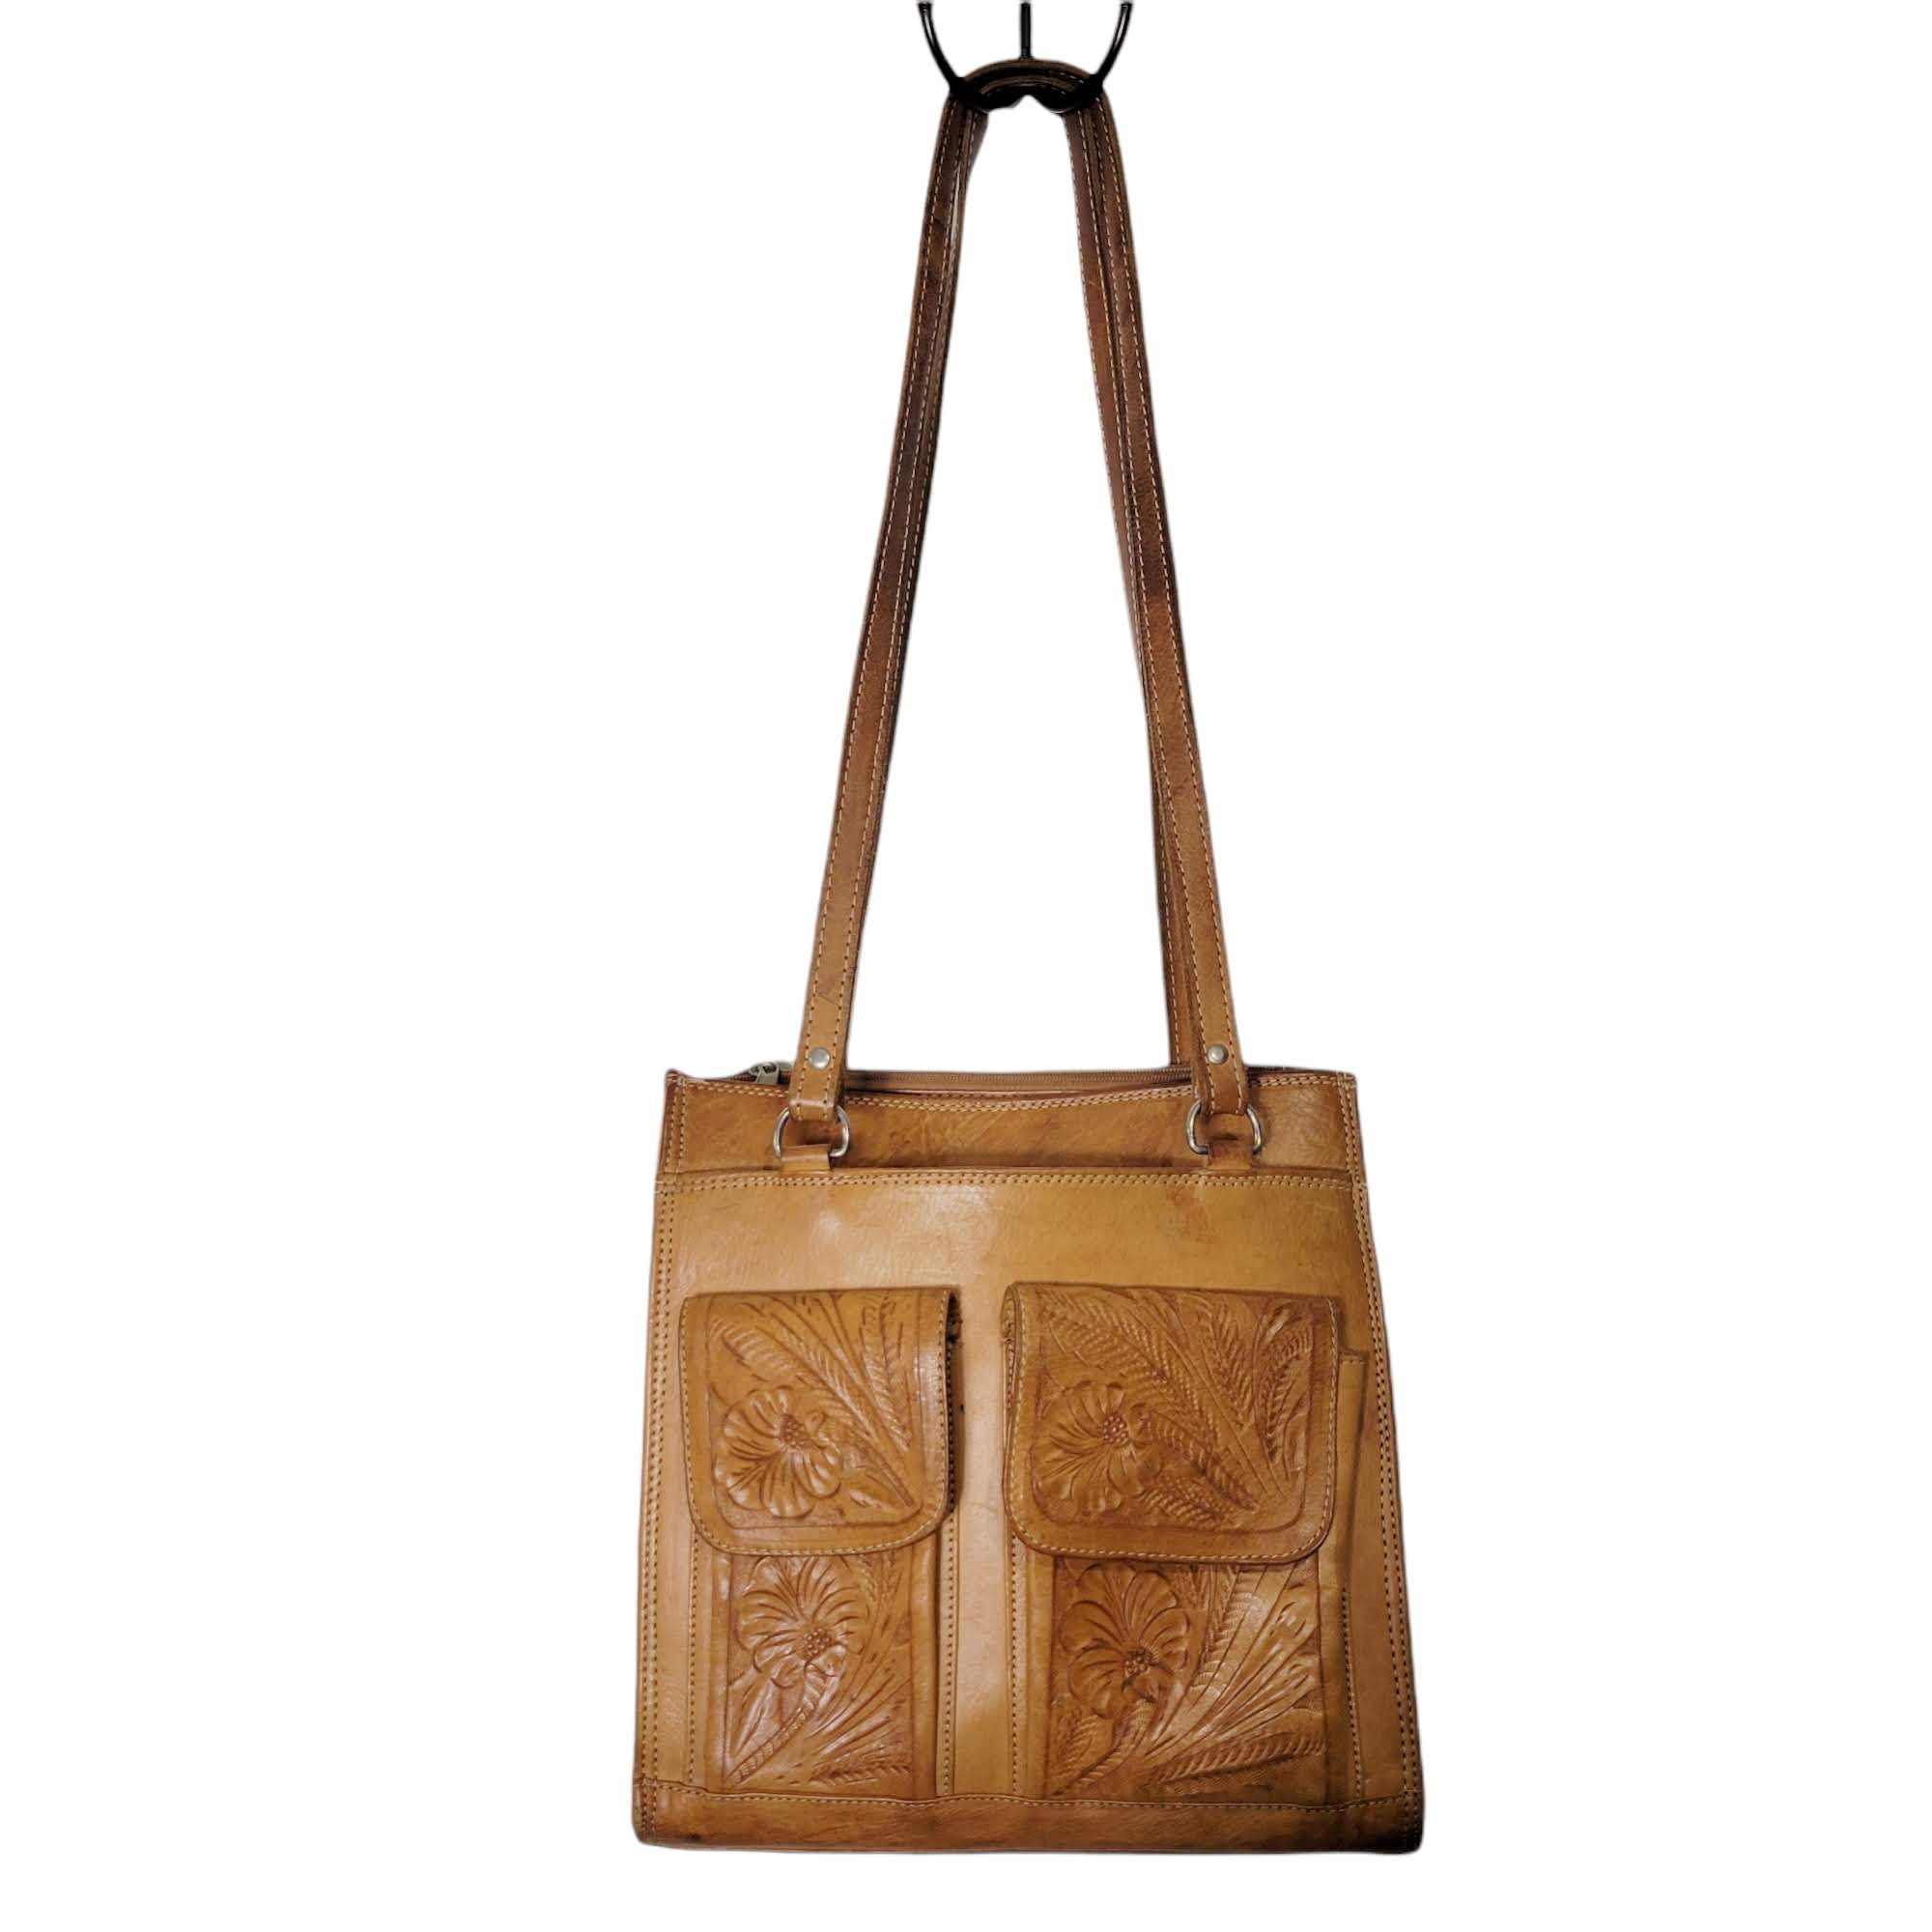 Vintage American West Hand Tooled Leather Bag